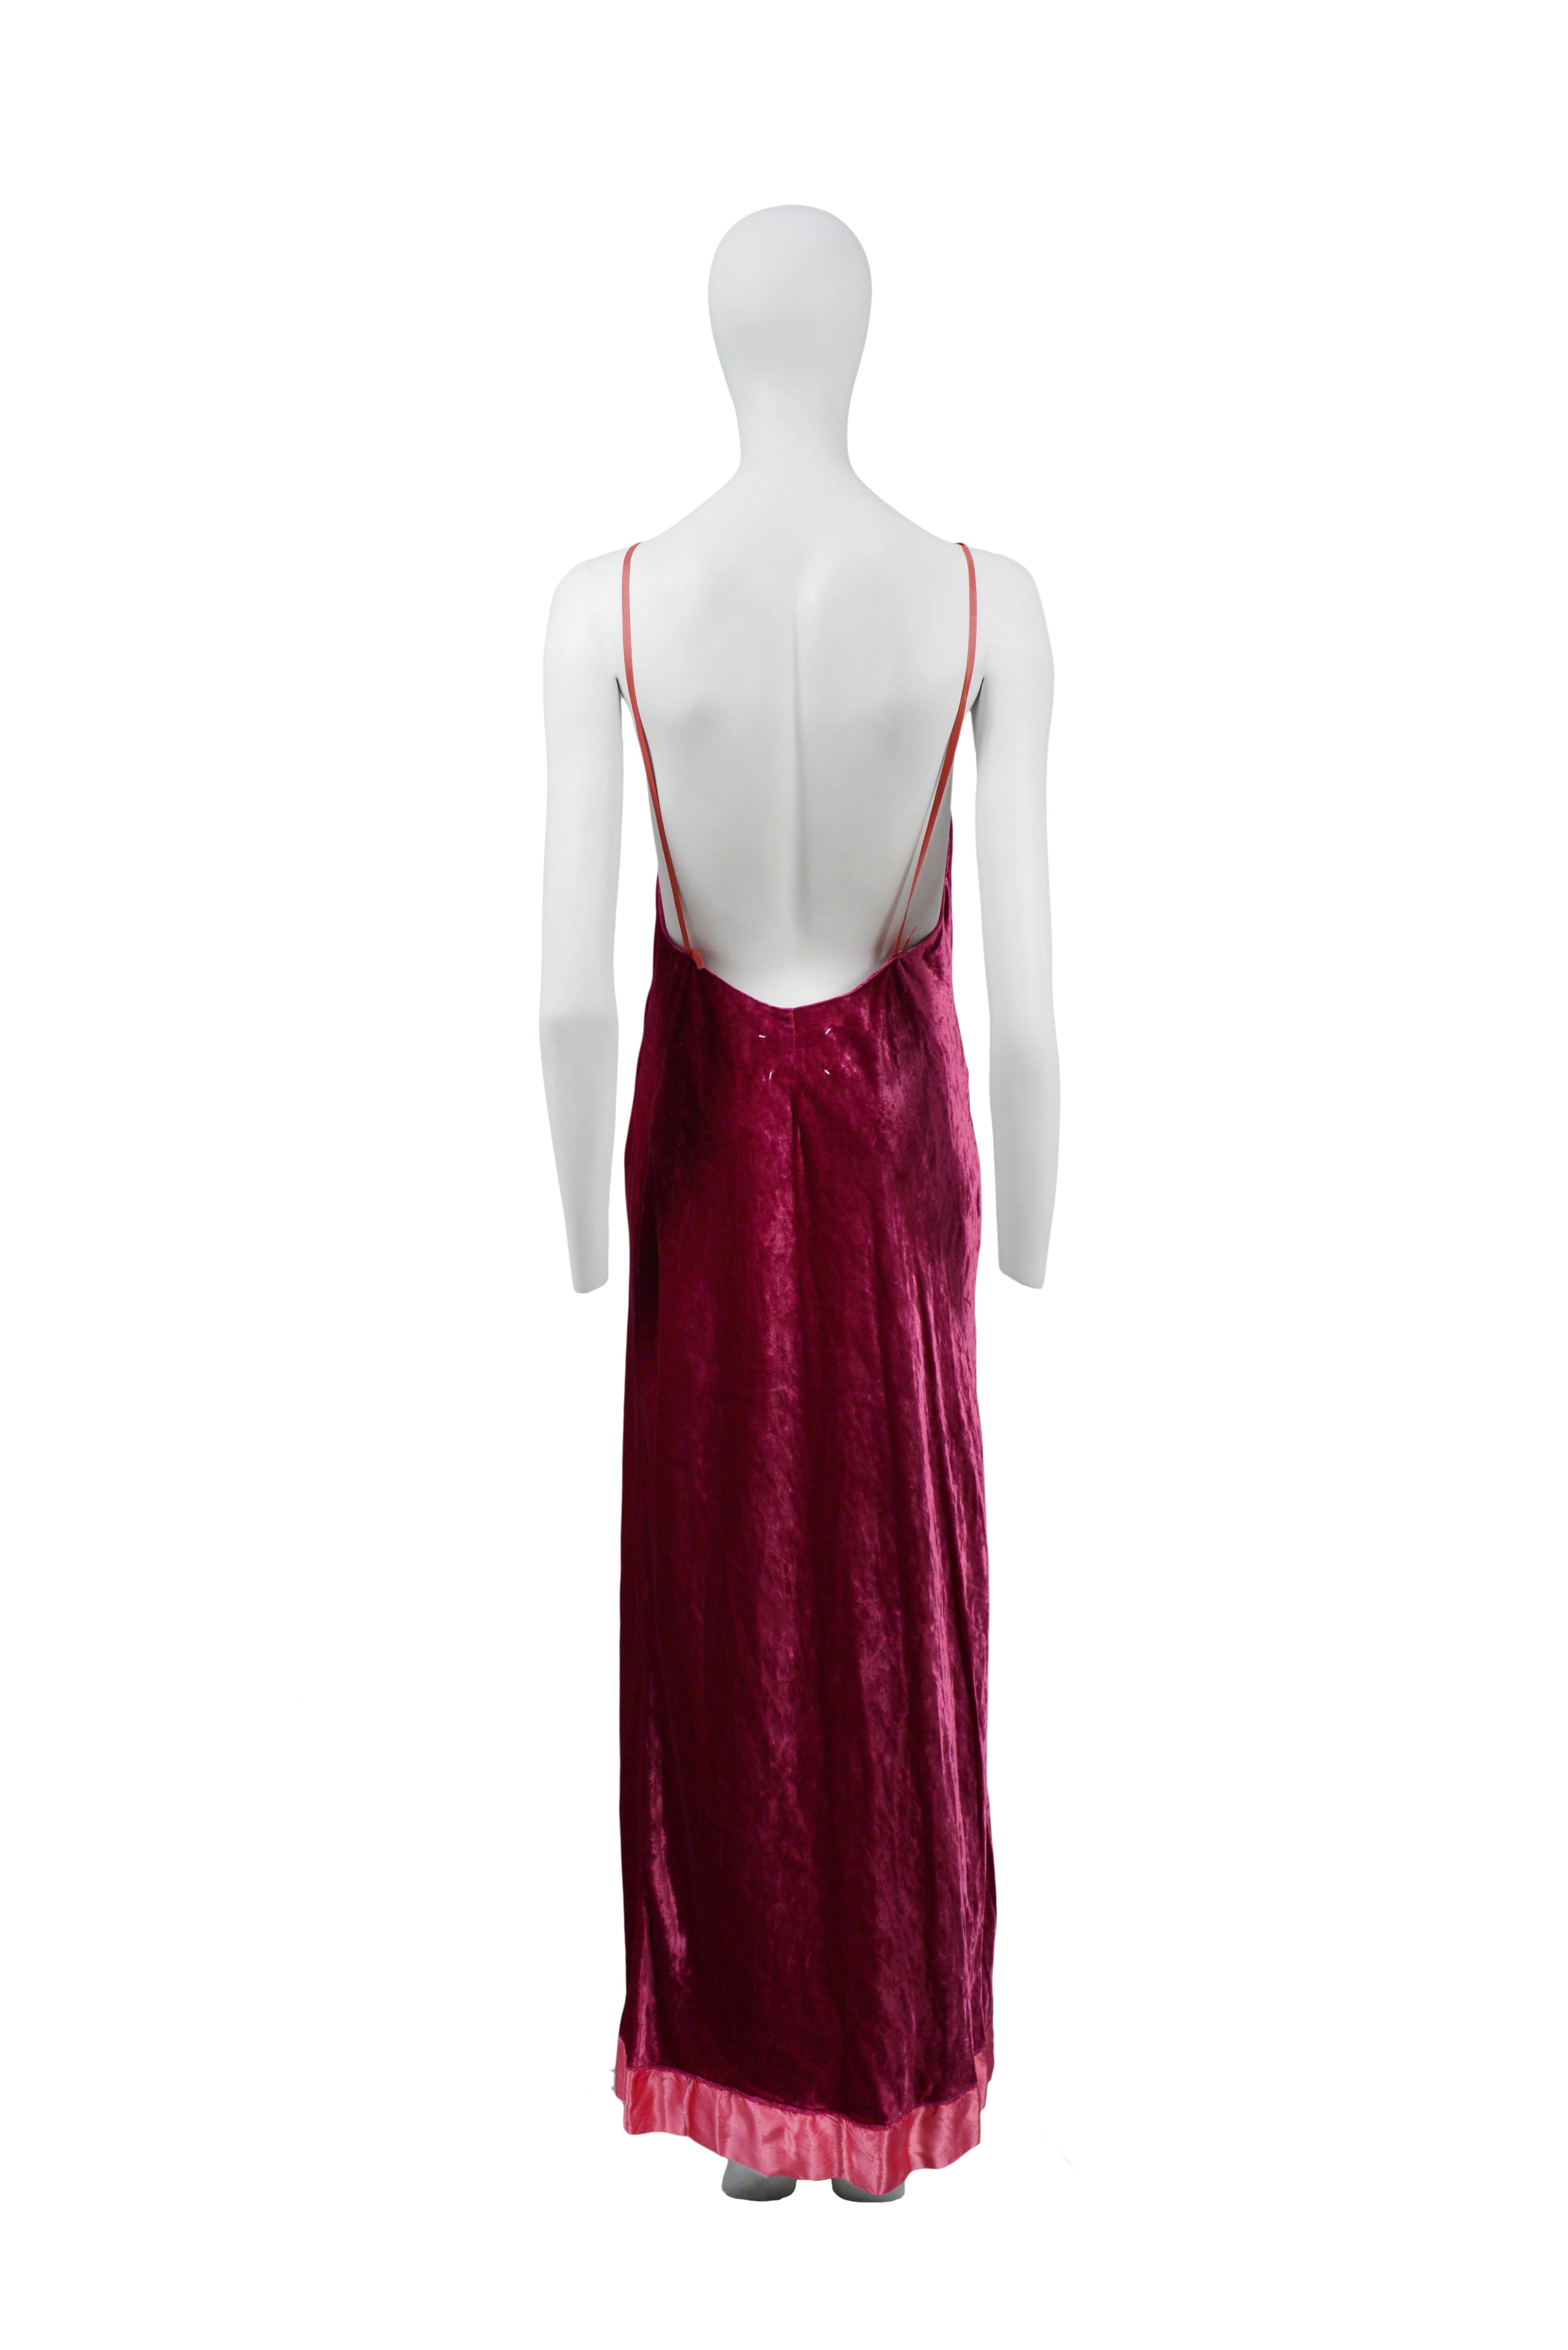 Martin Margiela Pink Velvet Gown 1995 In Excellent Condition In Los Angeles, CA